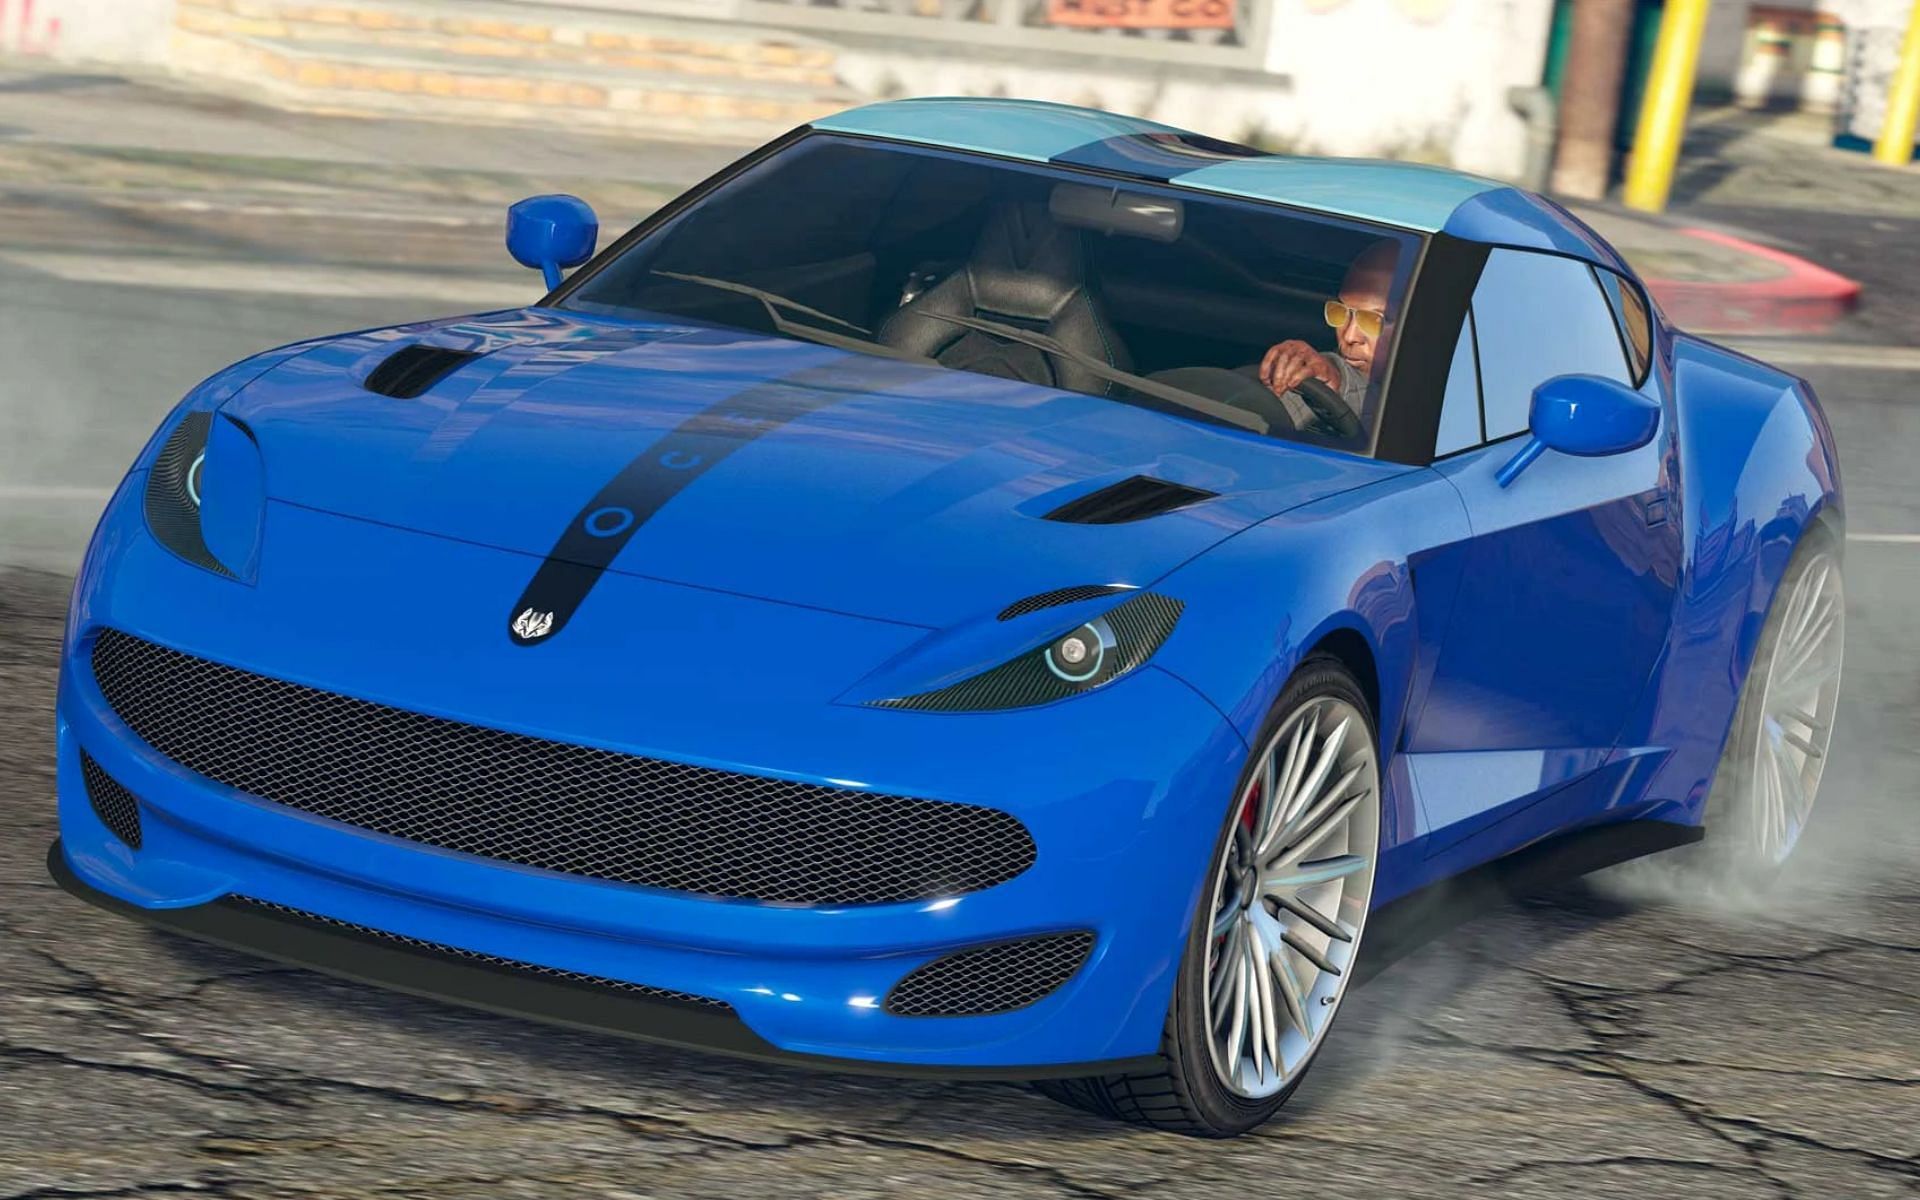 Top 5 Fastest Vehicles In GTA 5 Story Mode (Ranked By Top Speed